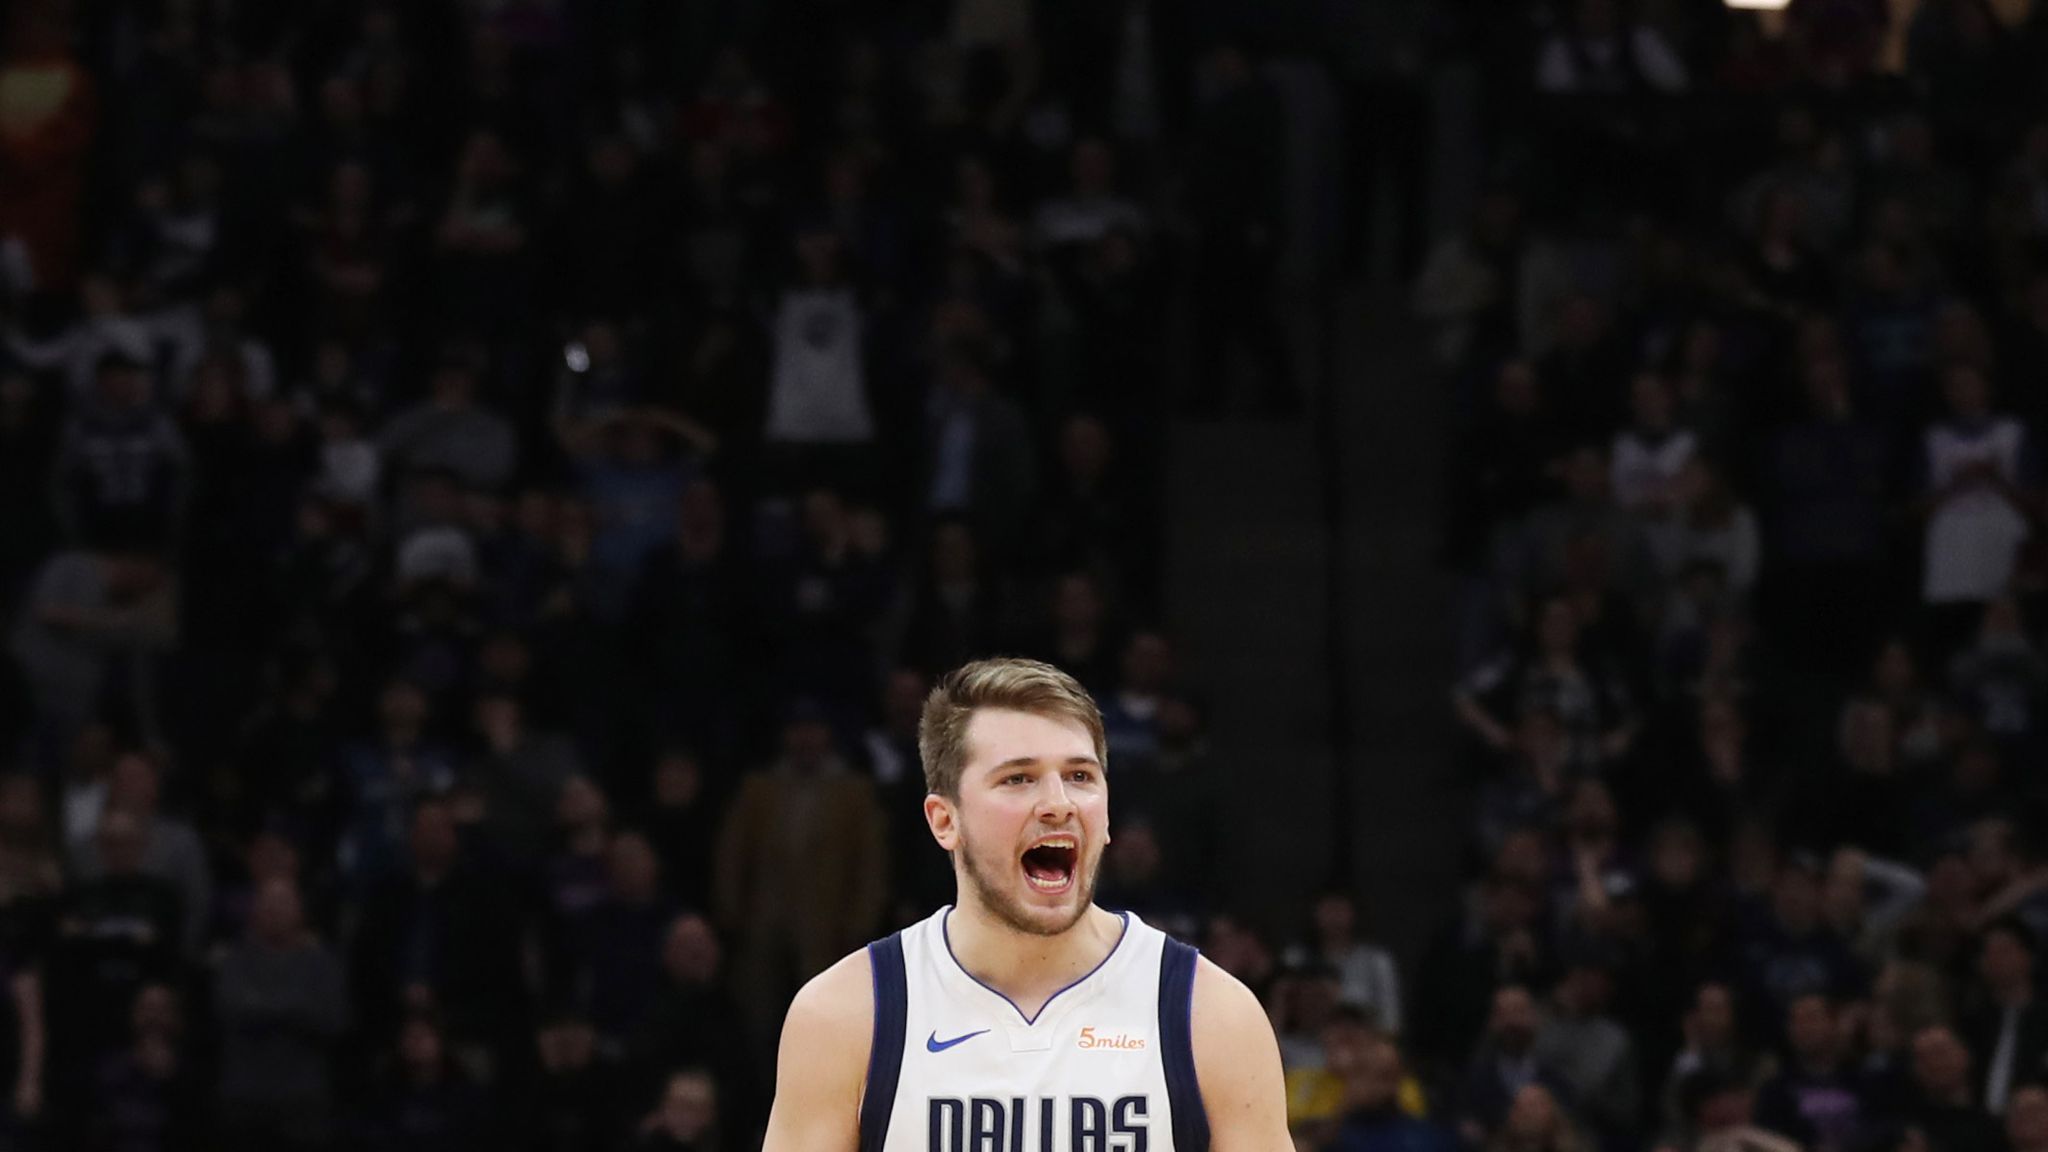 NBA - Luka Doncic goes off for 43 PTS, 17 REB, 13 AST and